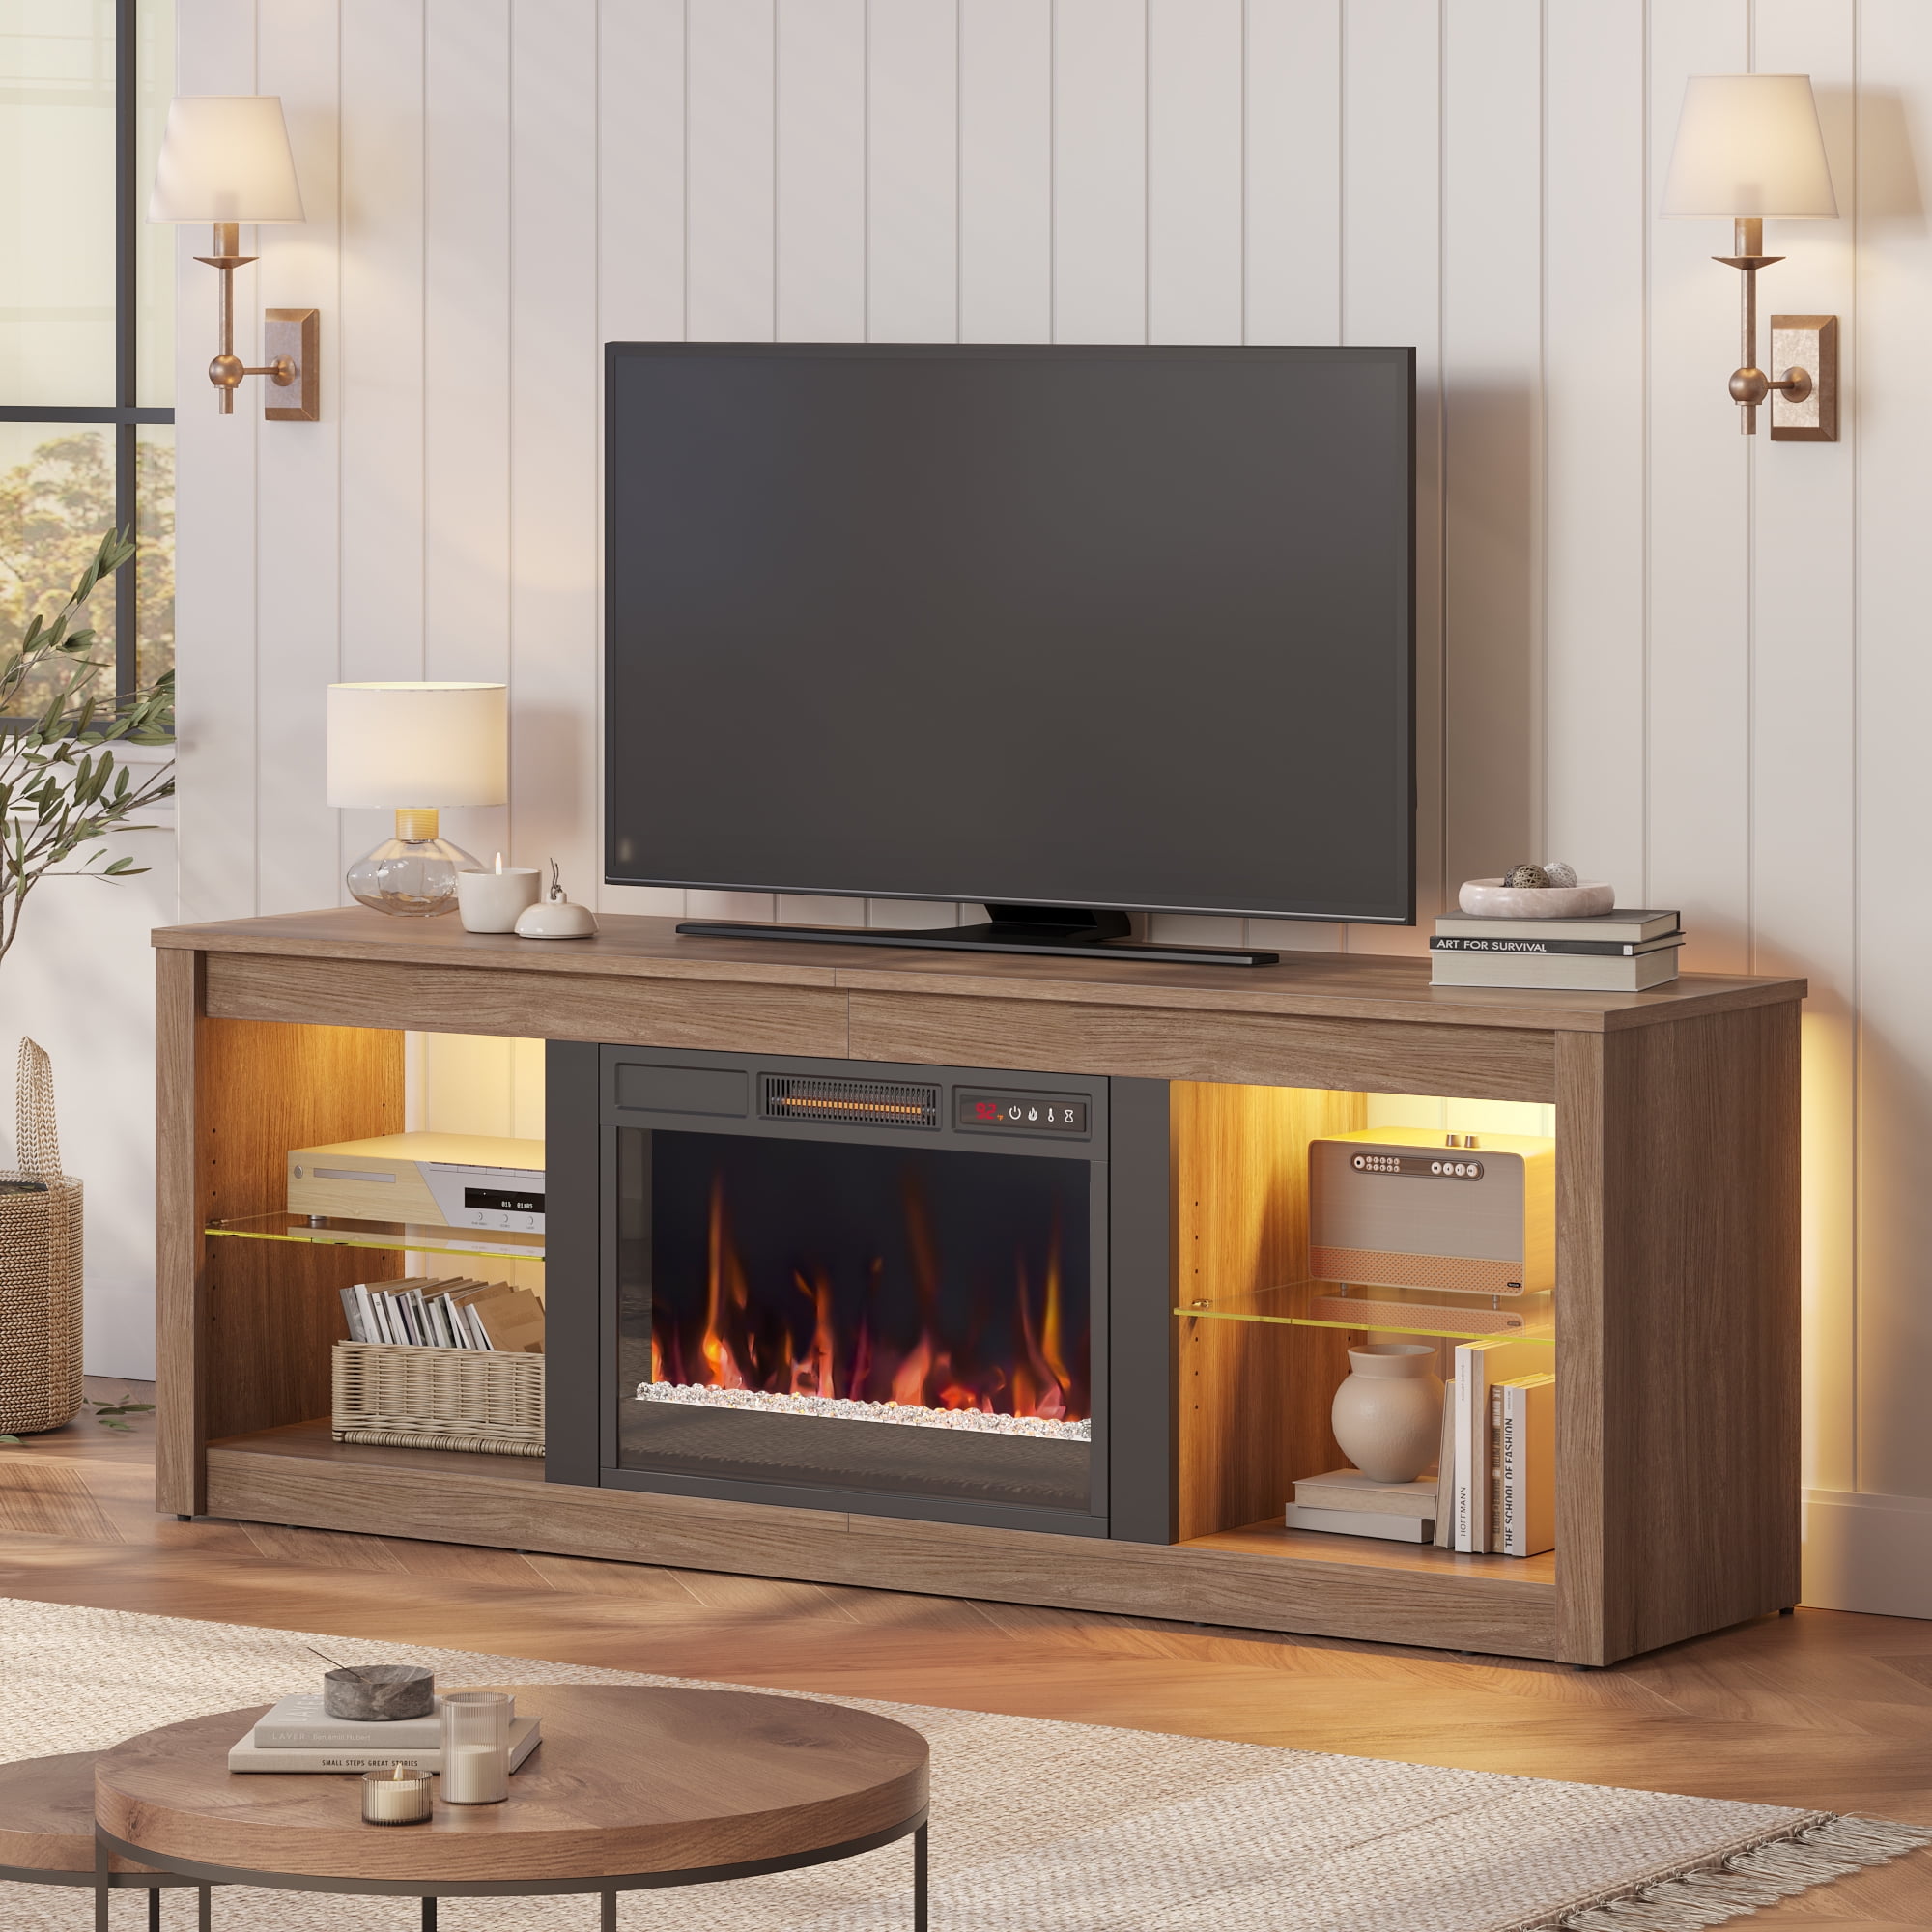 Bestier Modern Electric Color LED Fireplace TV Stand for TVs up to 70